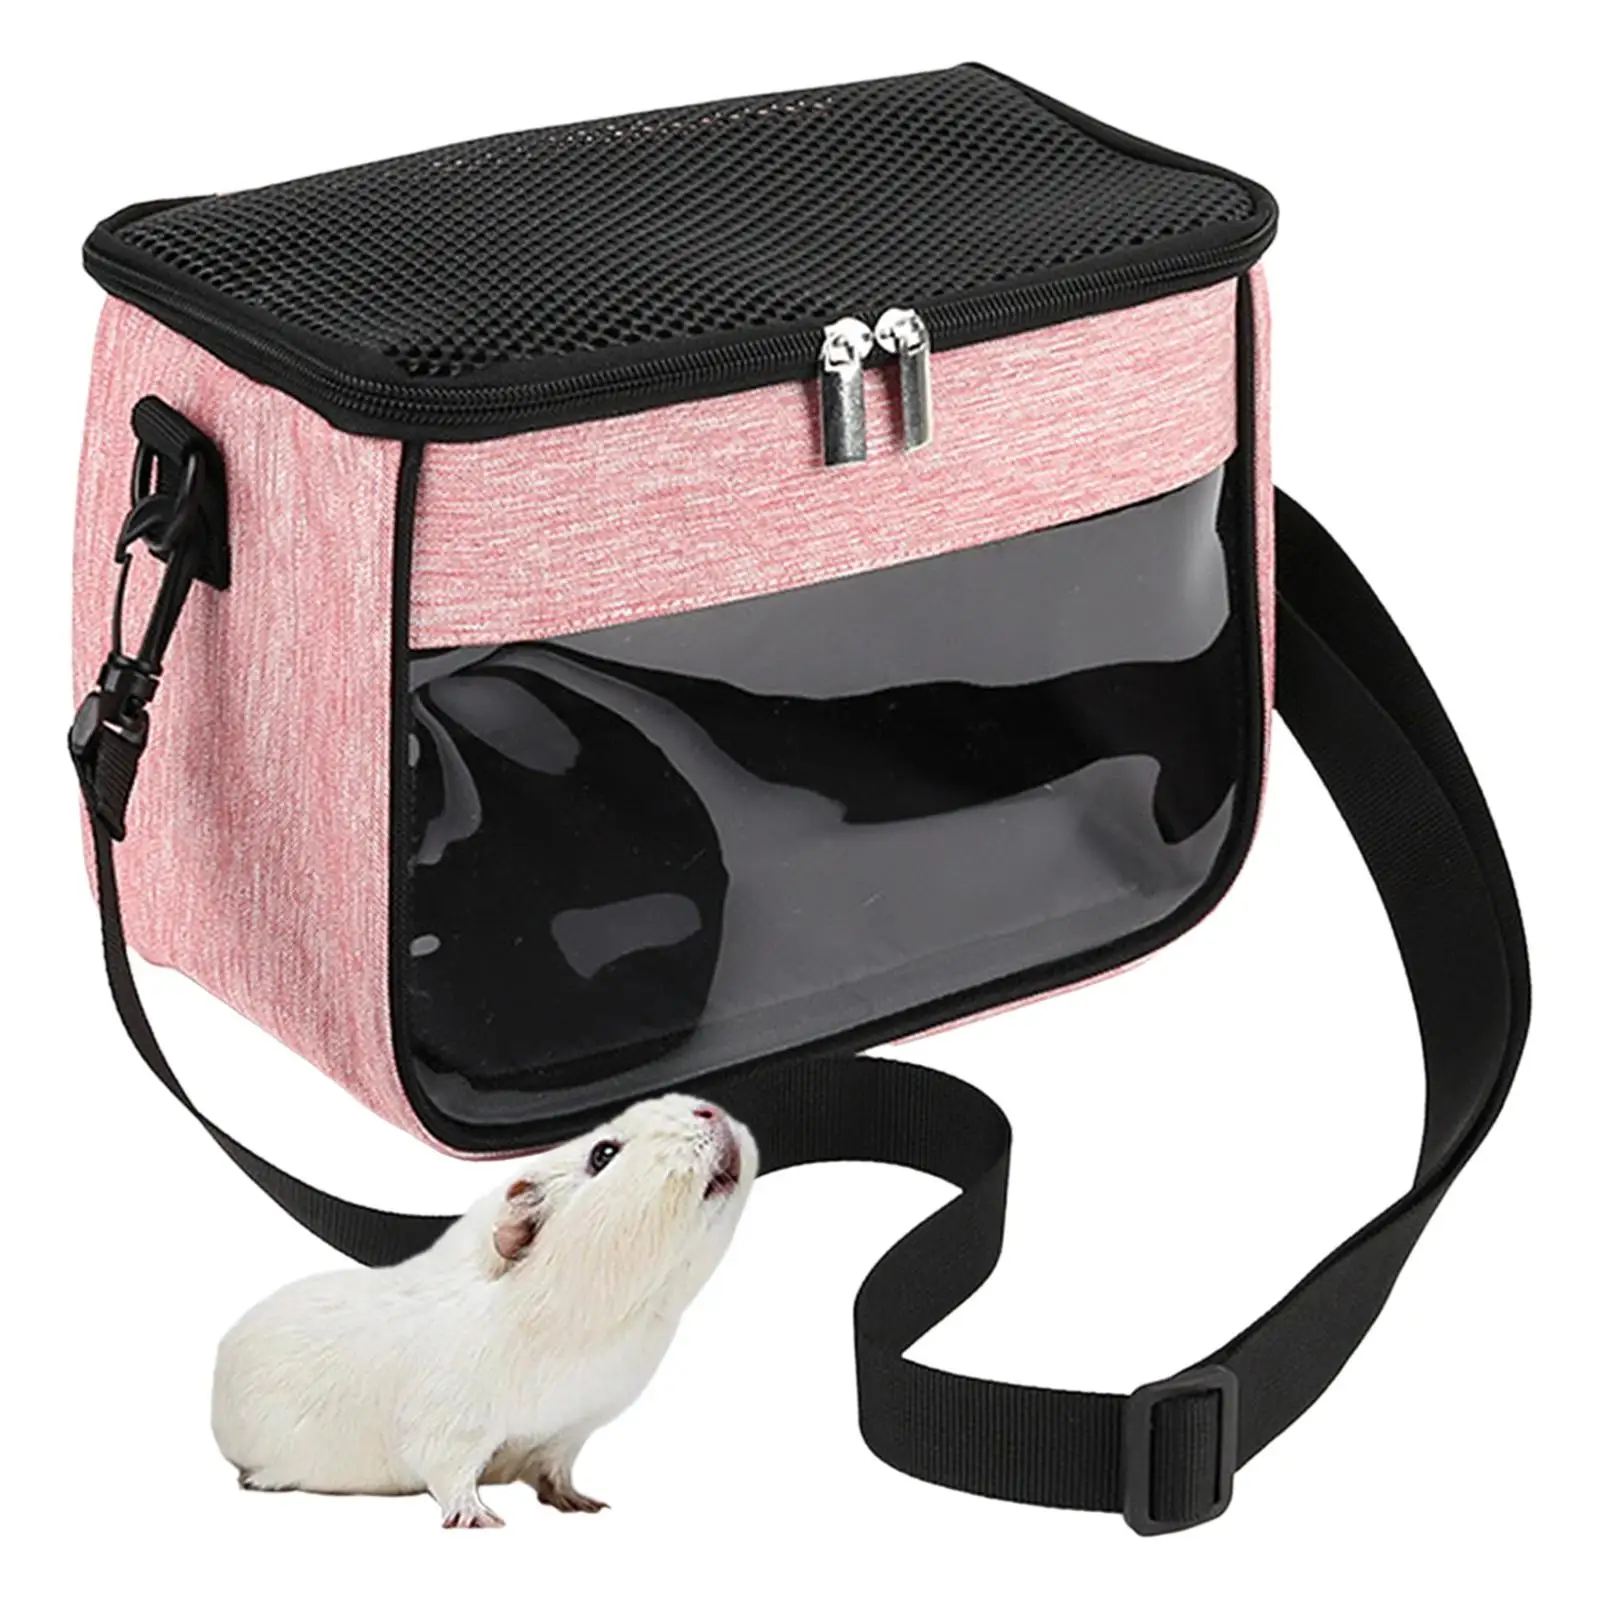 Hamster Carrier Bag Travel Carrier Outdoor Pouch for Hedgehog Small Animals